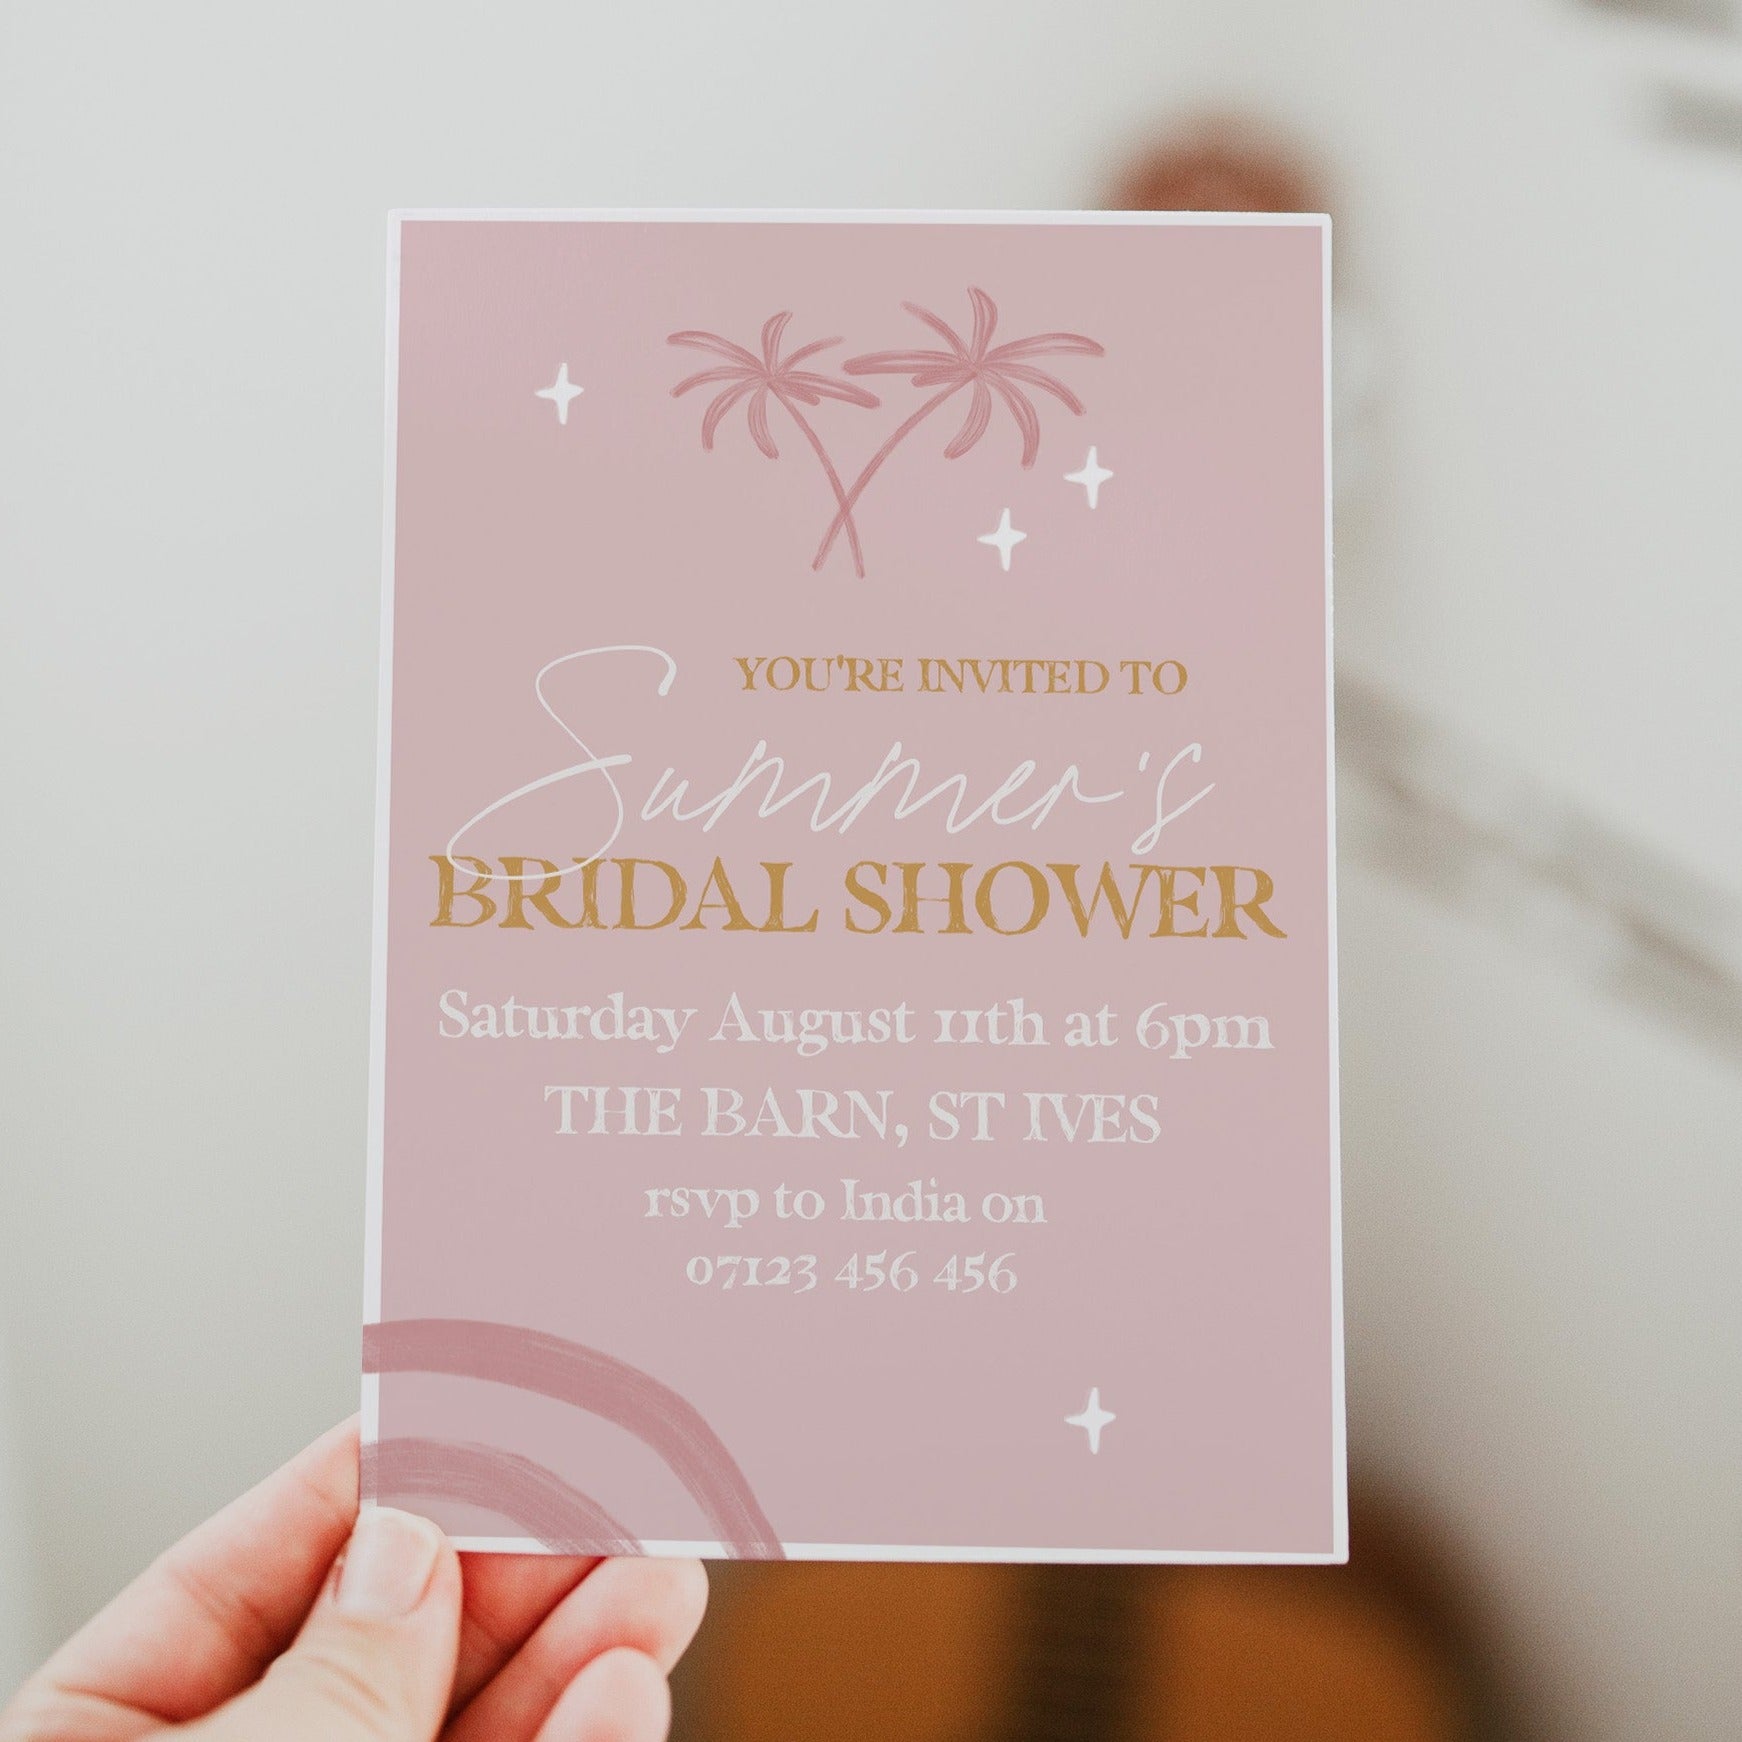 Fully editable and printable bridal shower invitation with a Palm Springs design. Perfect for a Palm Springs bridal shower themed party